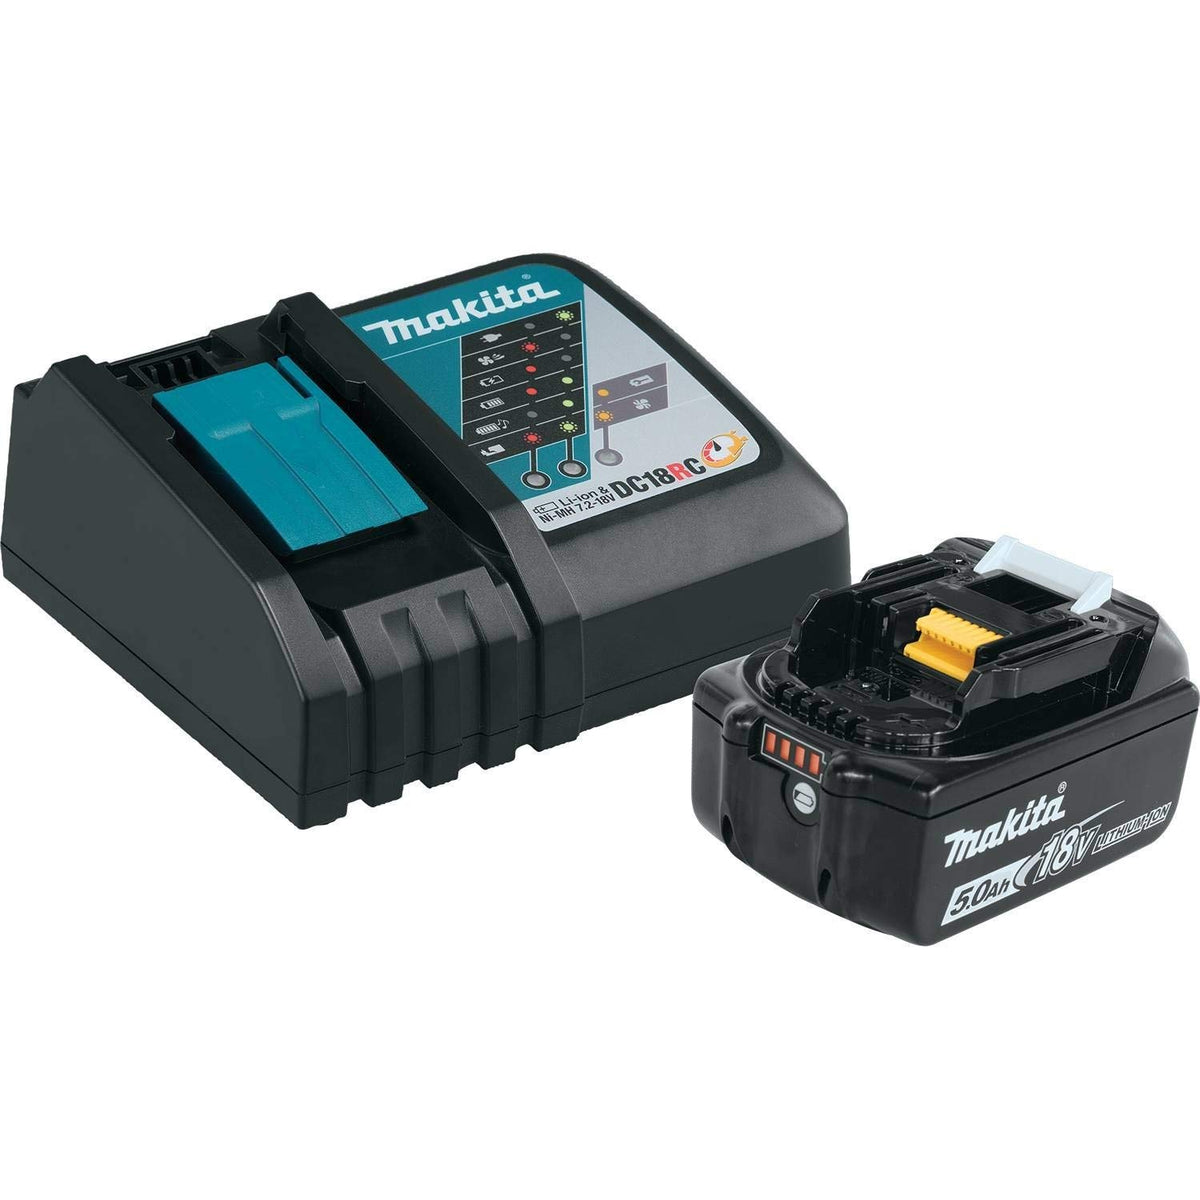 Makita BL1850BDC1 Lithium-Ion Battery and Charger Starter Pack